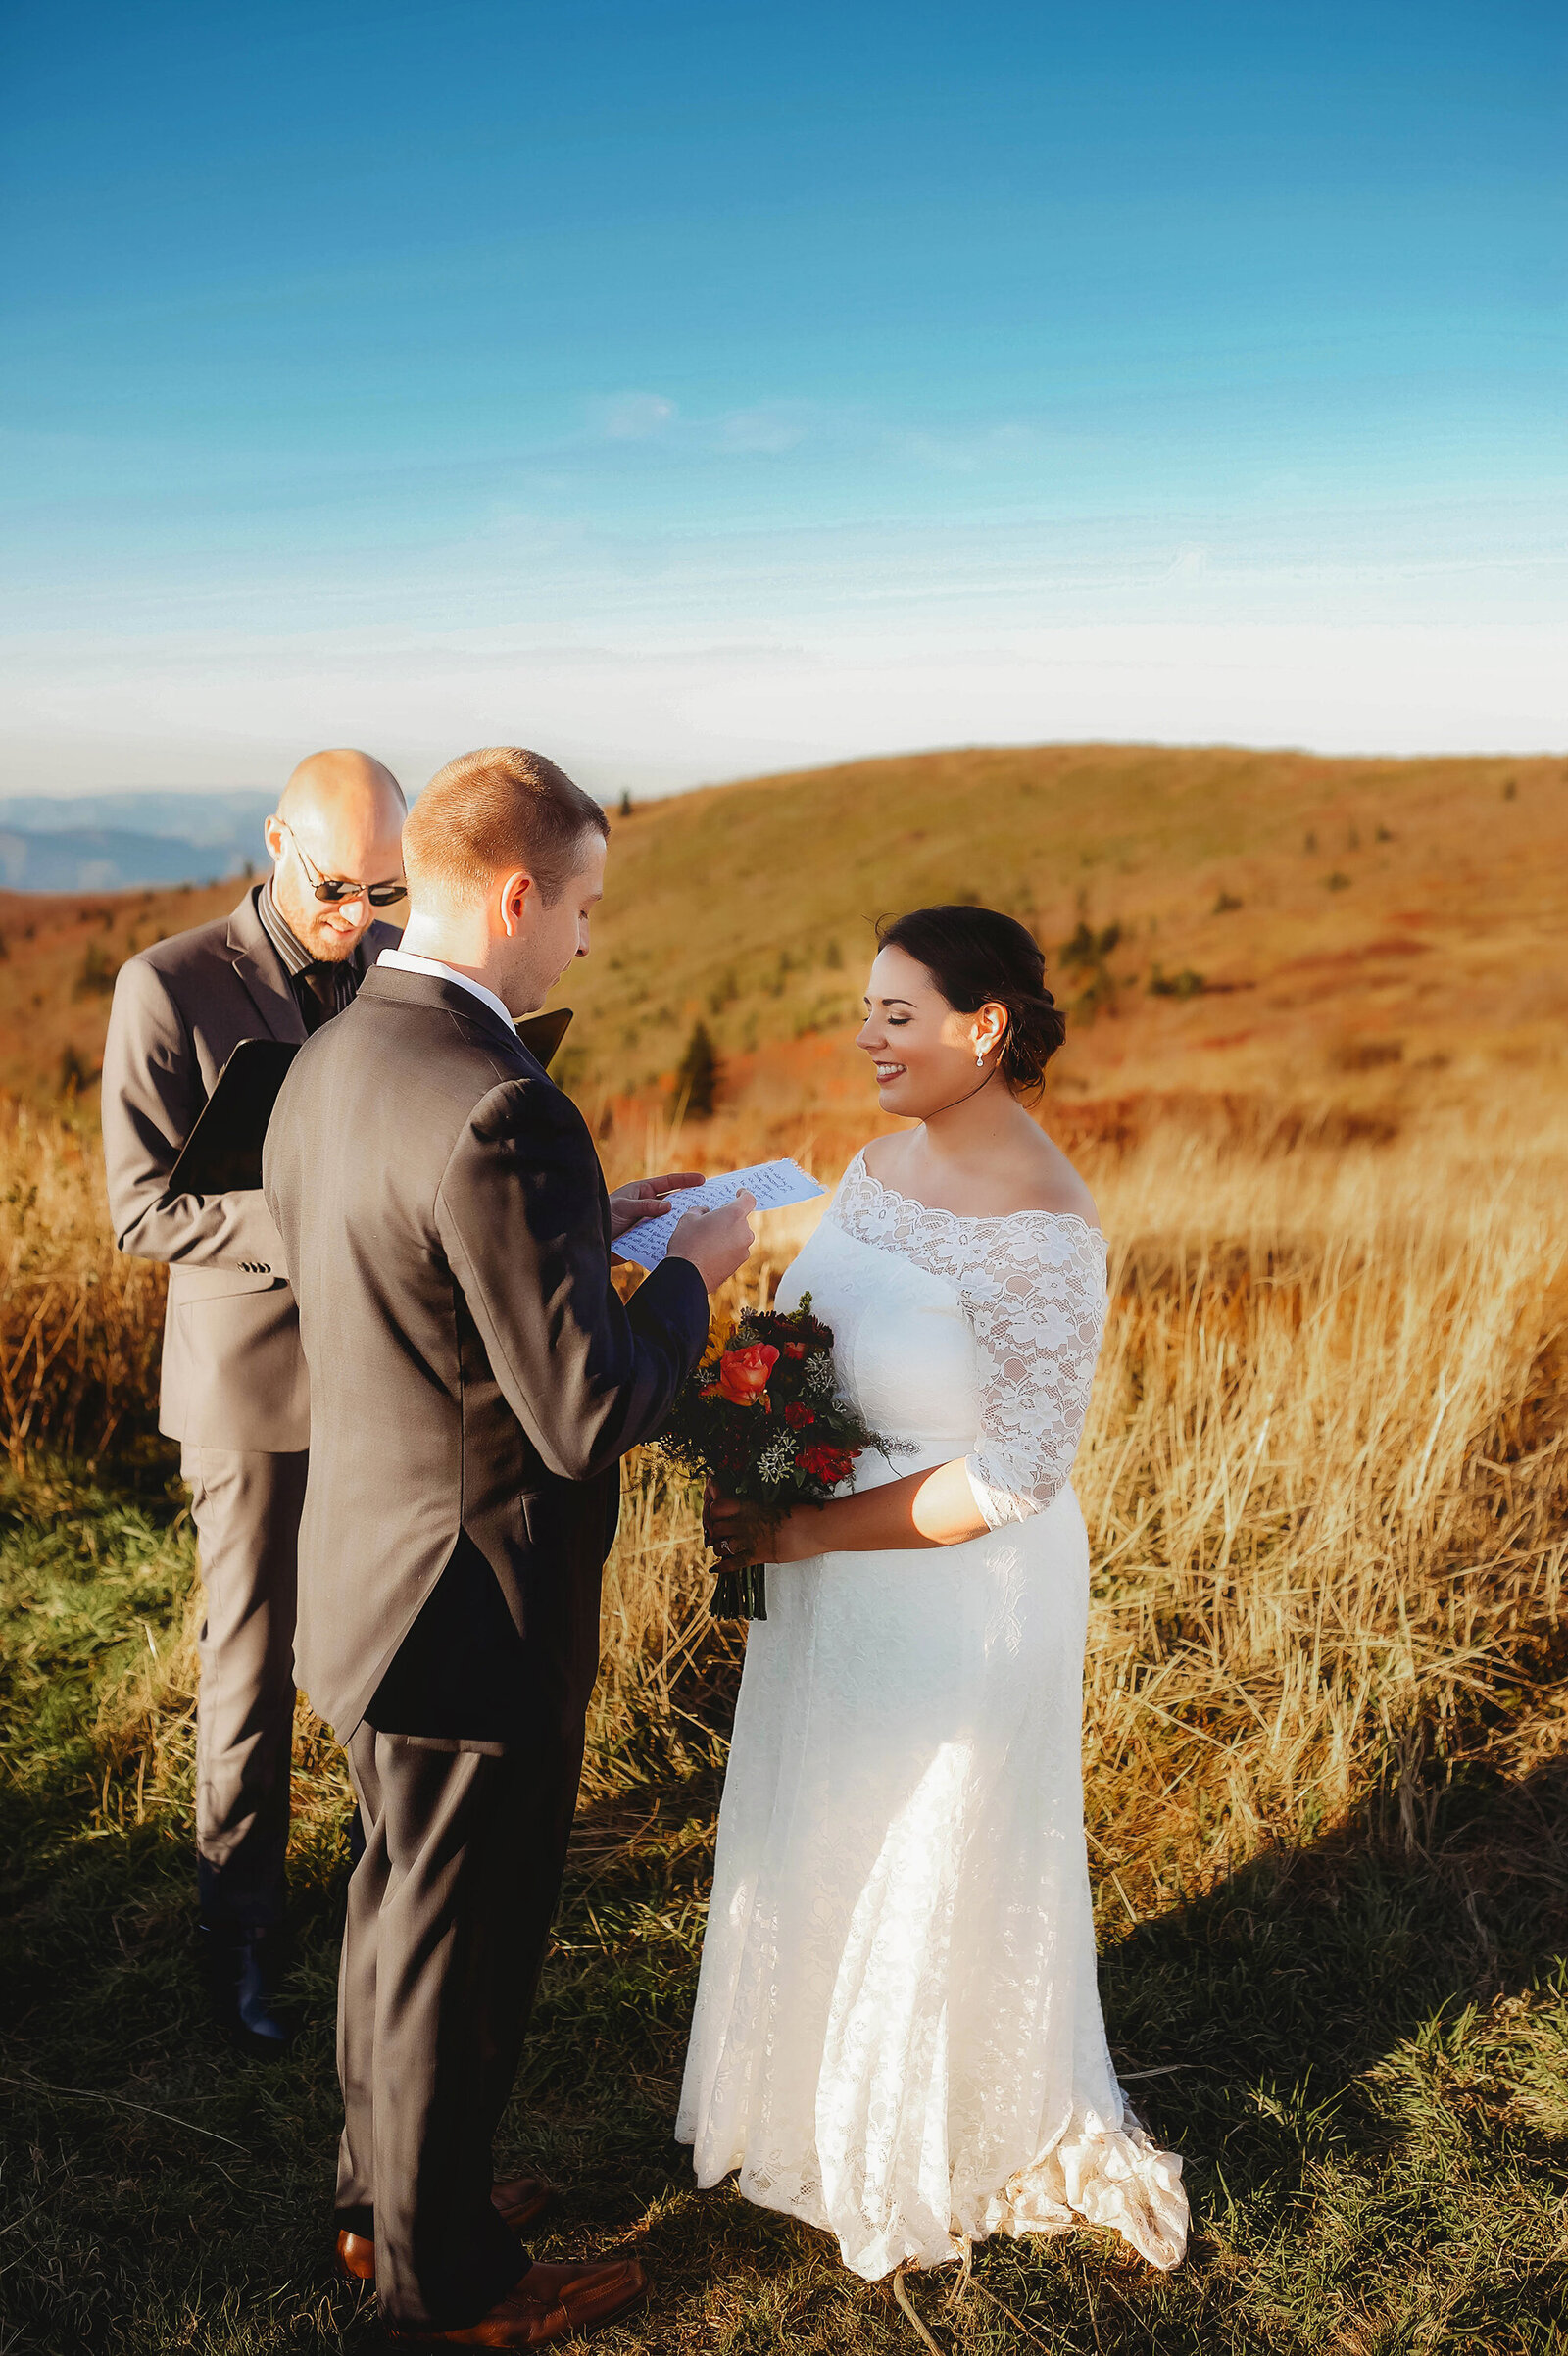 Elopement Ceremony at Black Balsam on the Blue Ridge Parkway outside of Asheville, NC.